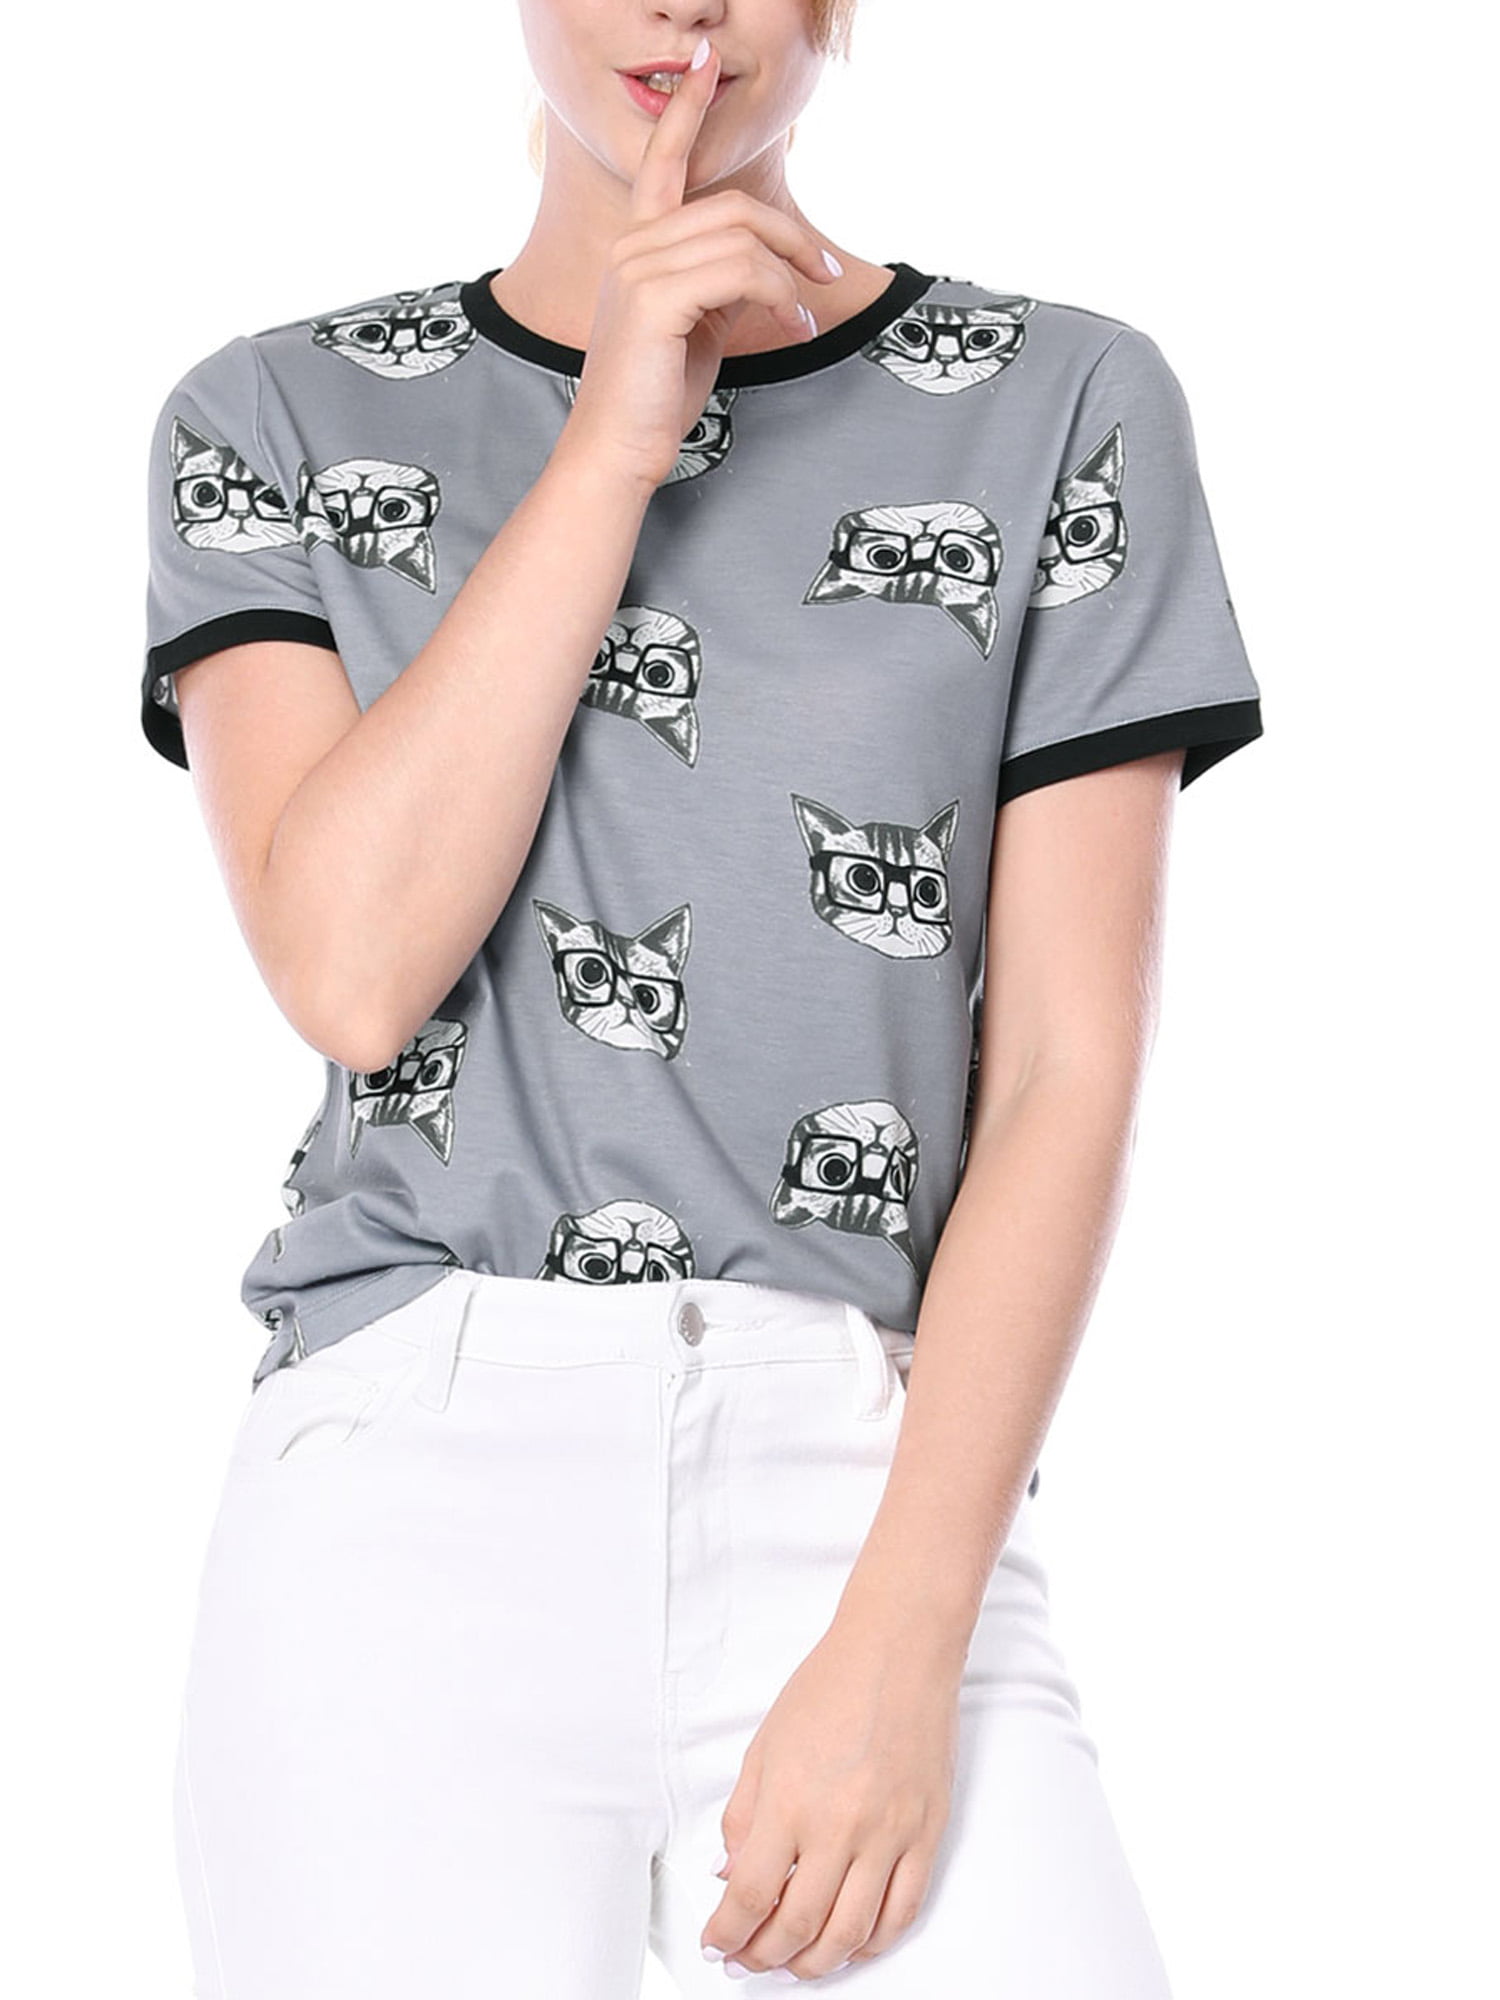 Tsmile Women Premium Quality Cute Kitty Printing Tee Cotton Blend Short Sleeve O-Neck Casual T-Shirt Pullover Tops